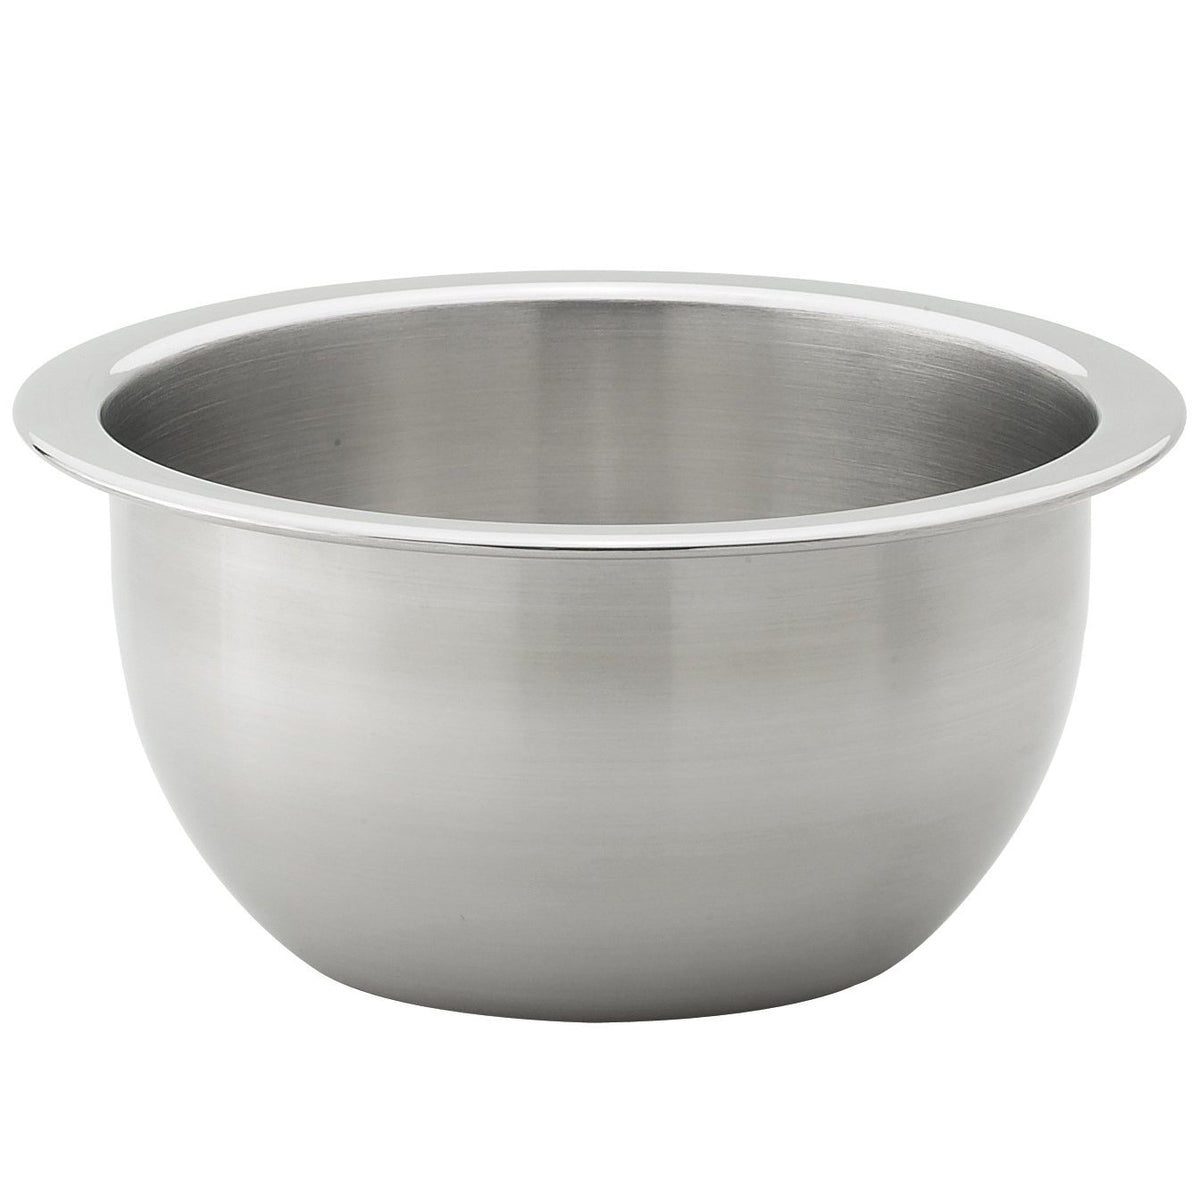 The Essentials 48001 Mixing Bowl, Stainless Steel, 2 Quarts